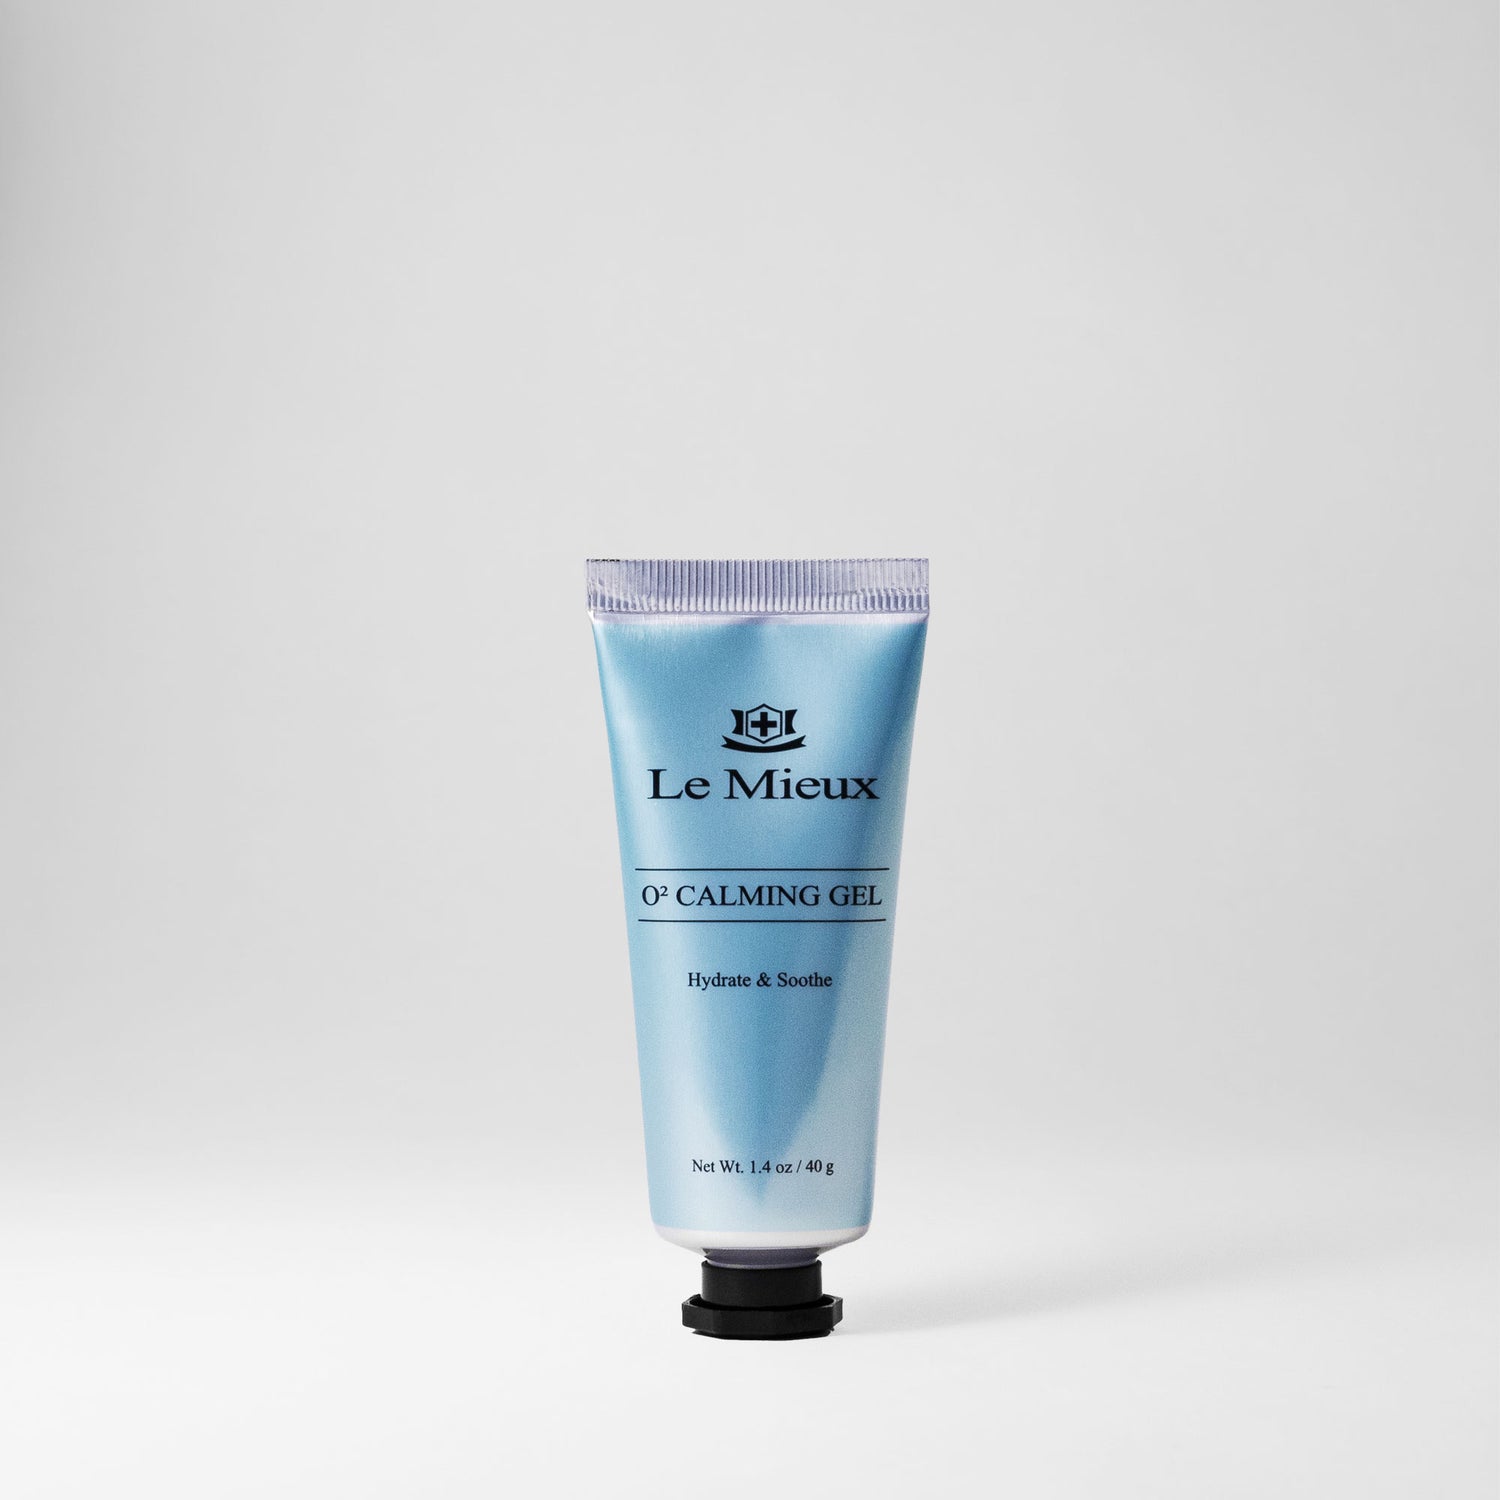  O² CALMING GEL from Le Mieux Skincare - 3